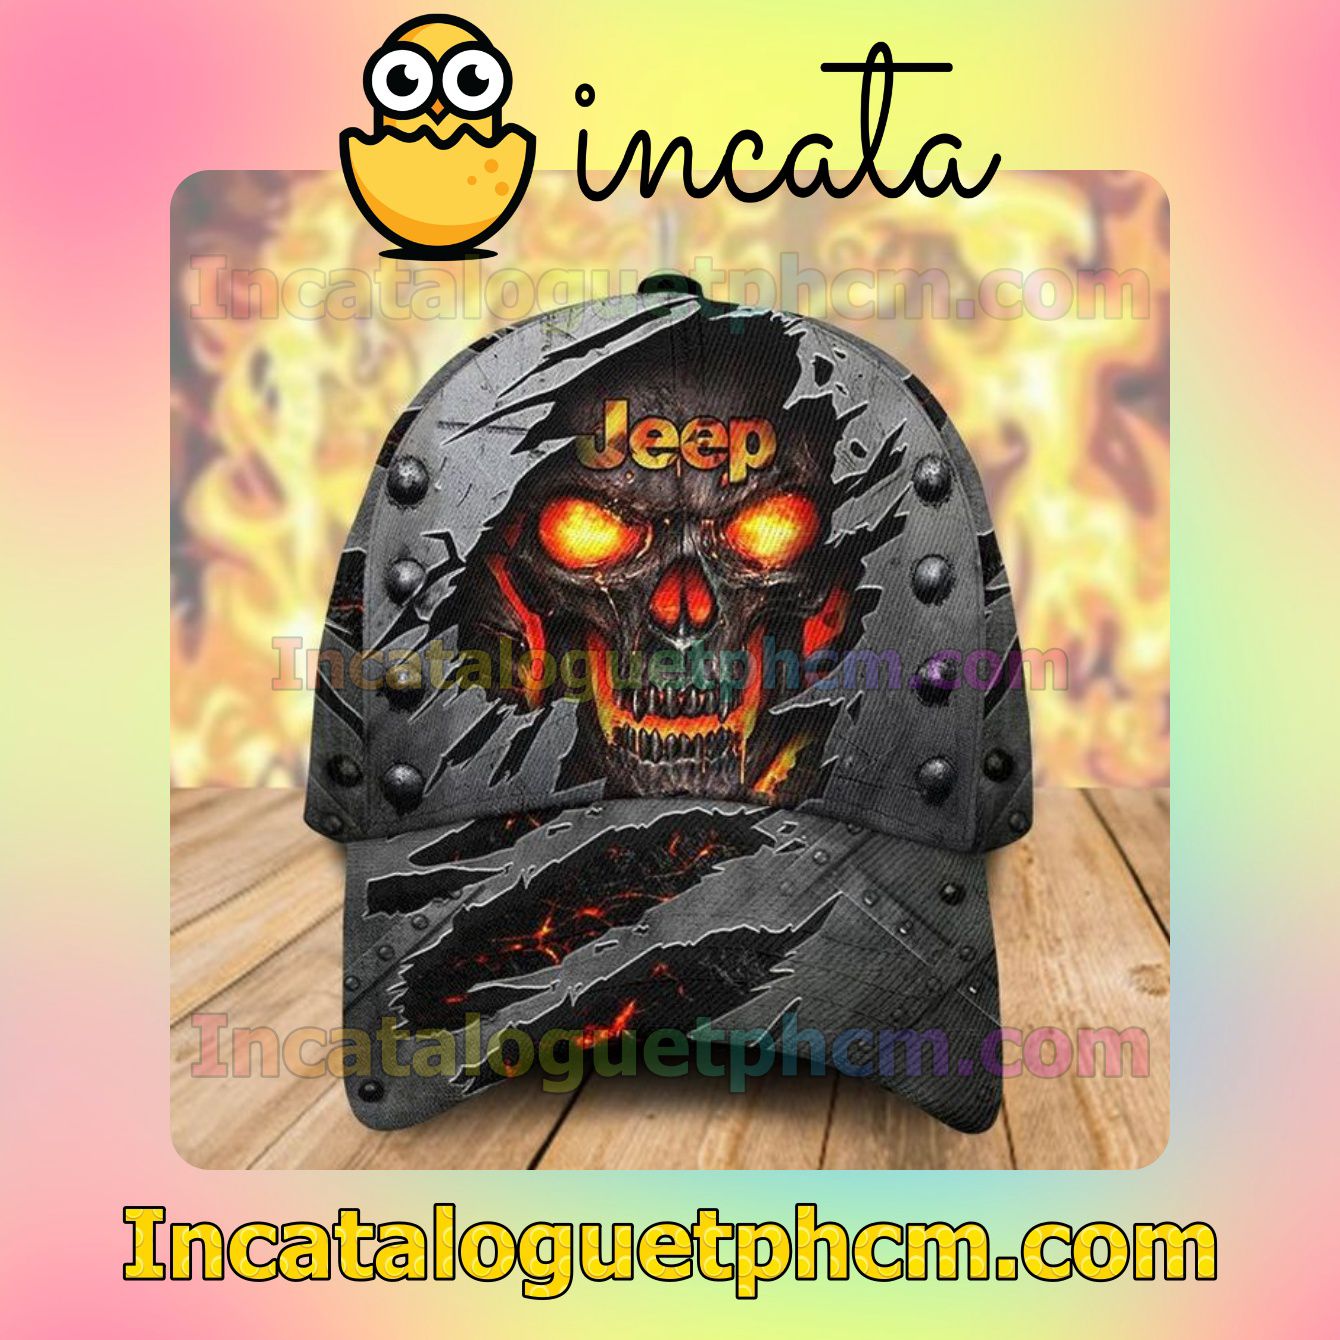 Unique Jeep Skull Fire Torn Ripped Classic Hat Caps Gift For Men